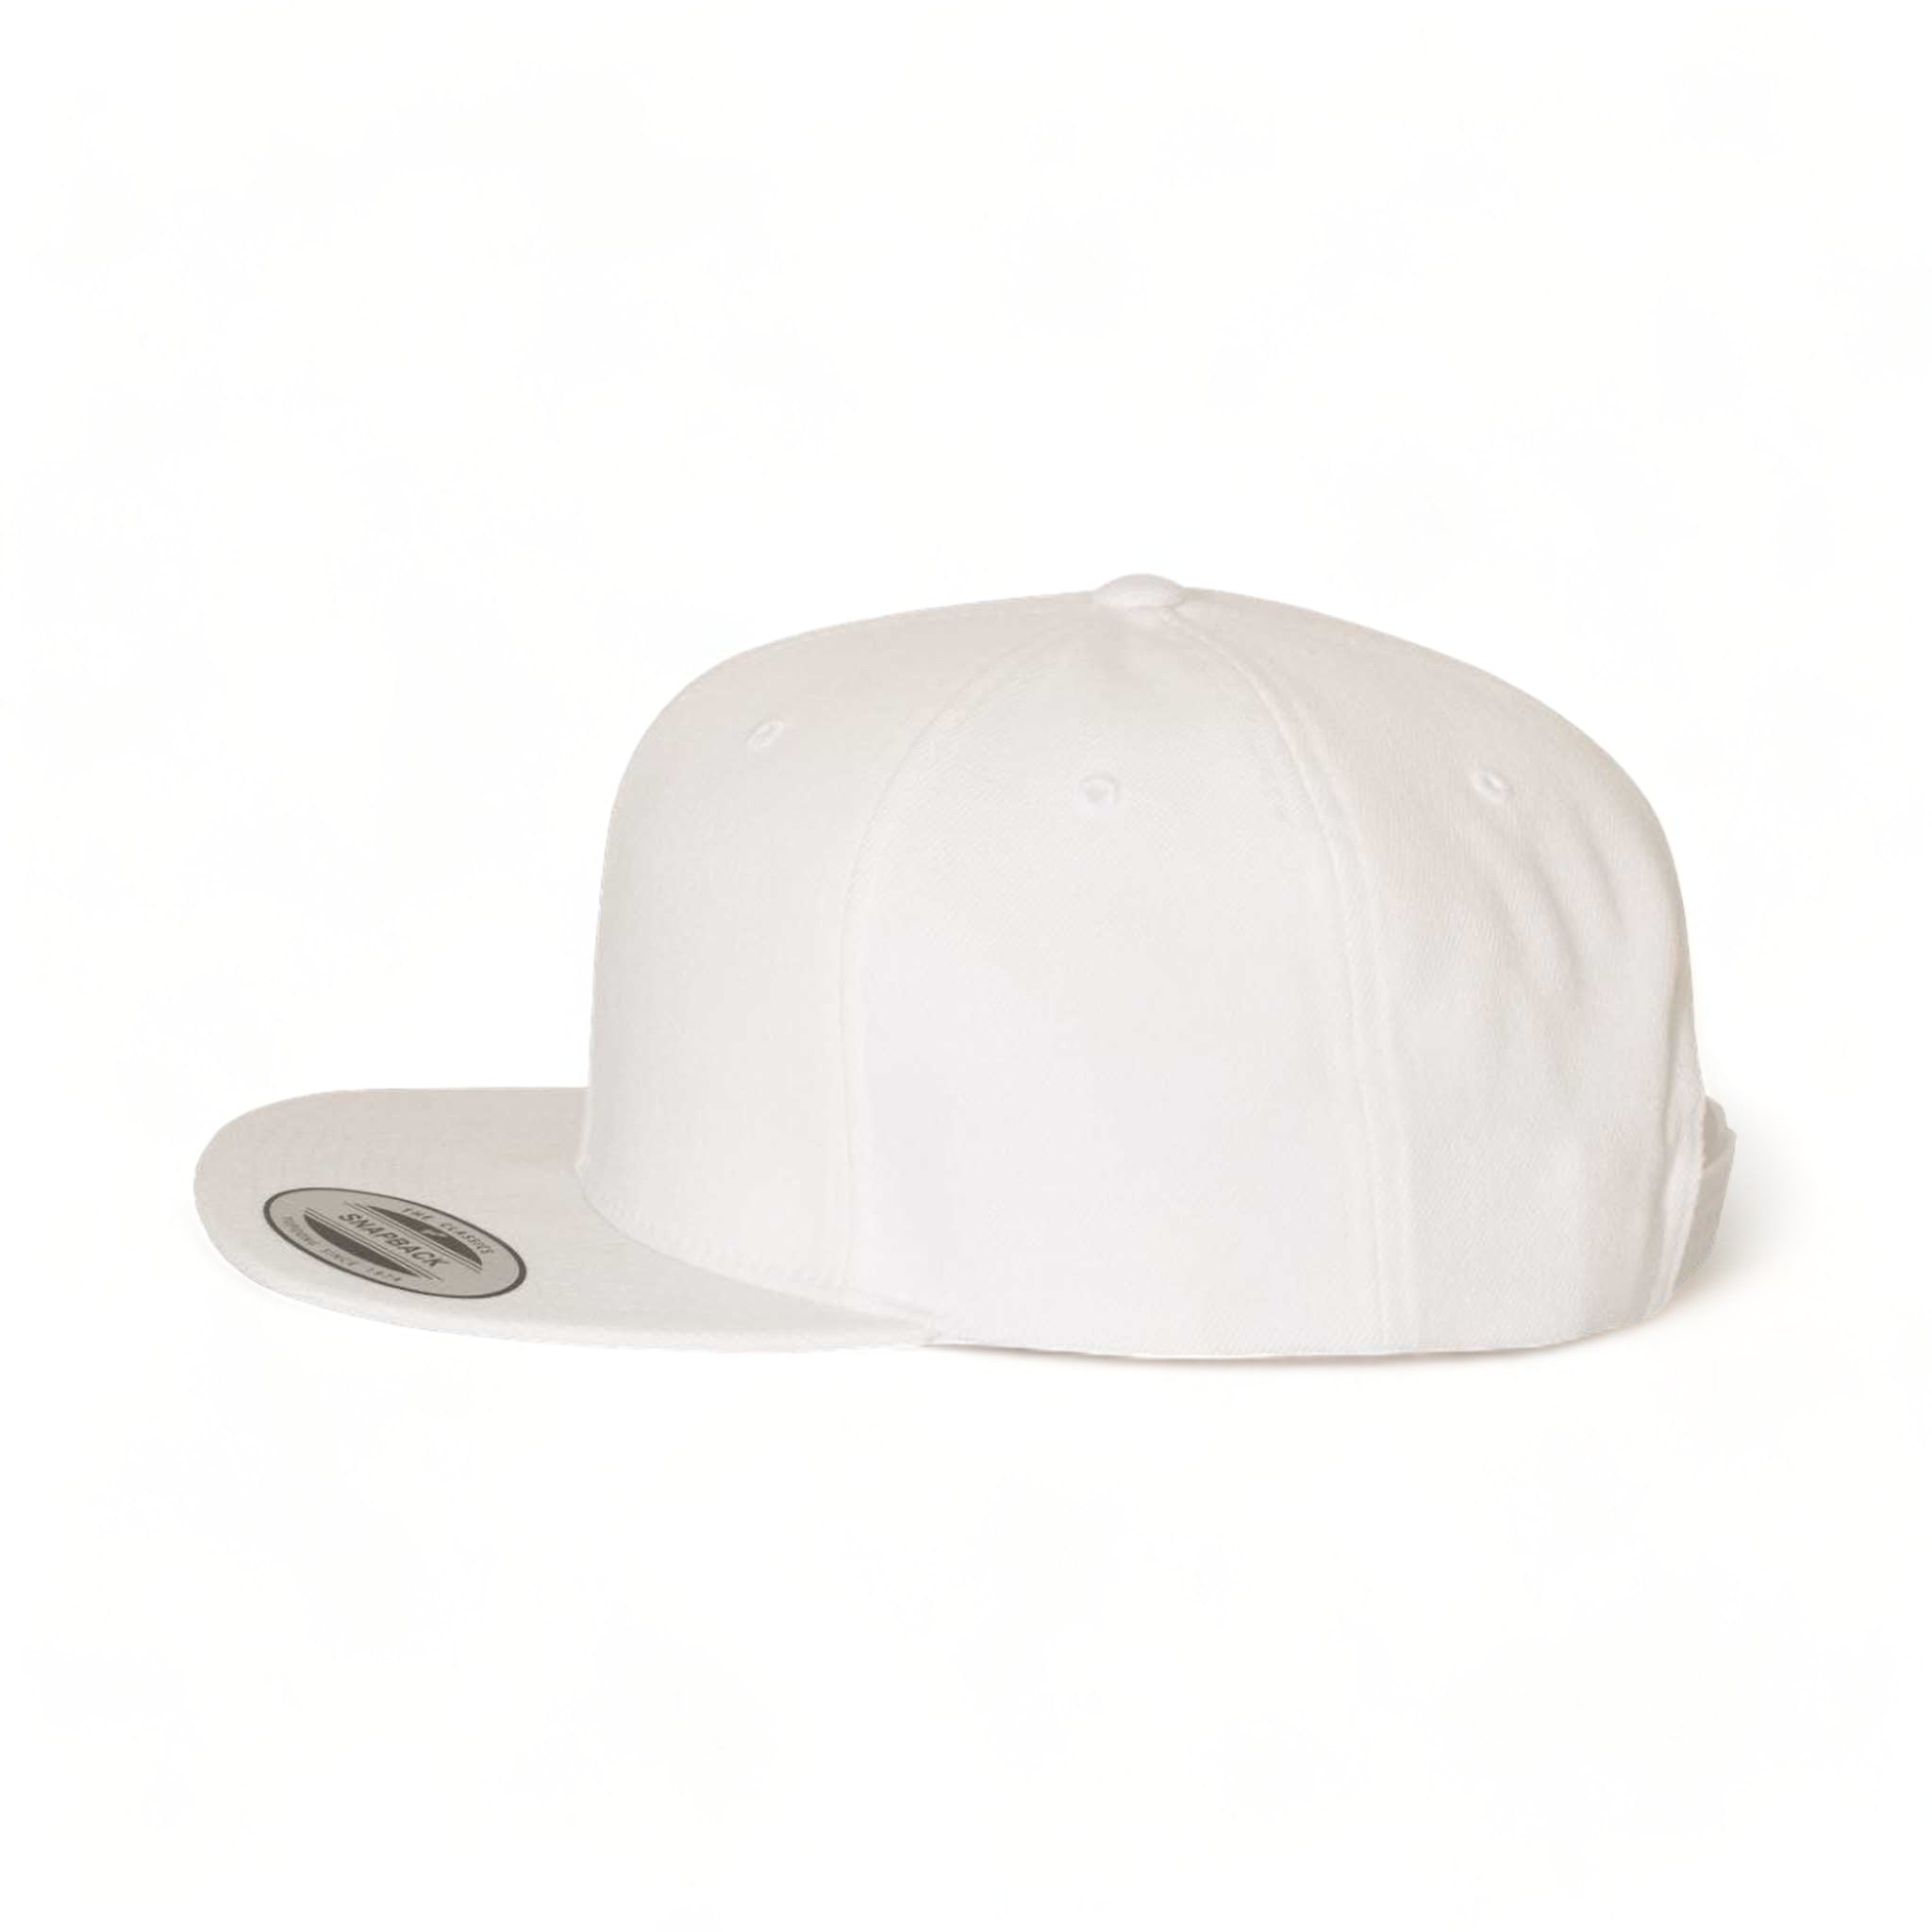 Side view of YP Classics 6089M custom hat in white